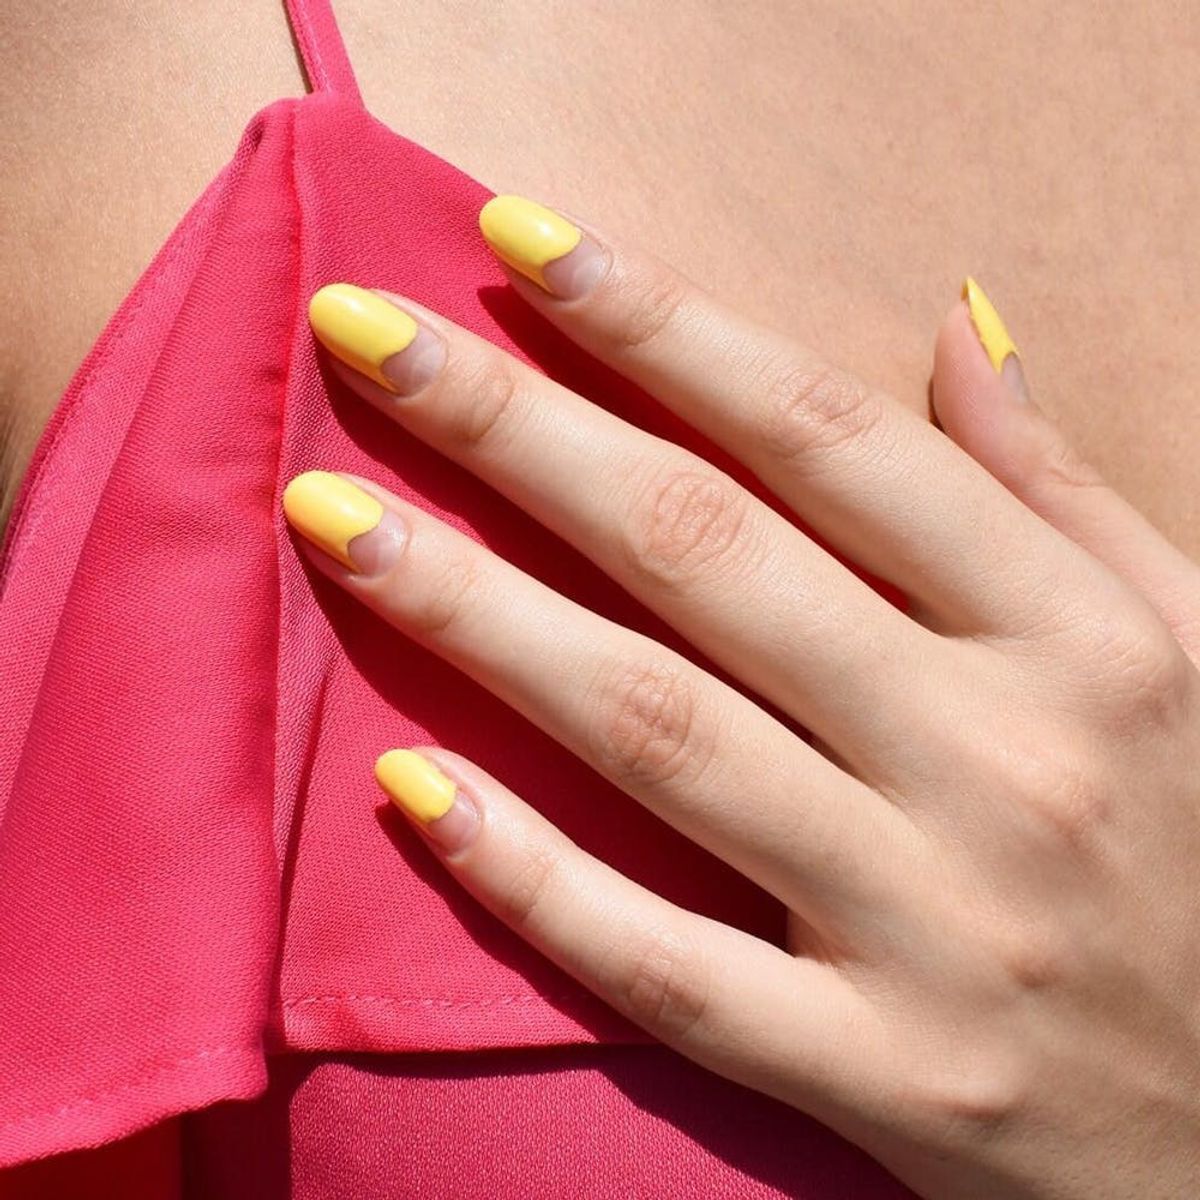 10 Neon Nail Art Ideas That Will Have You Heading to the Salon